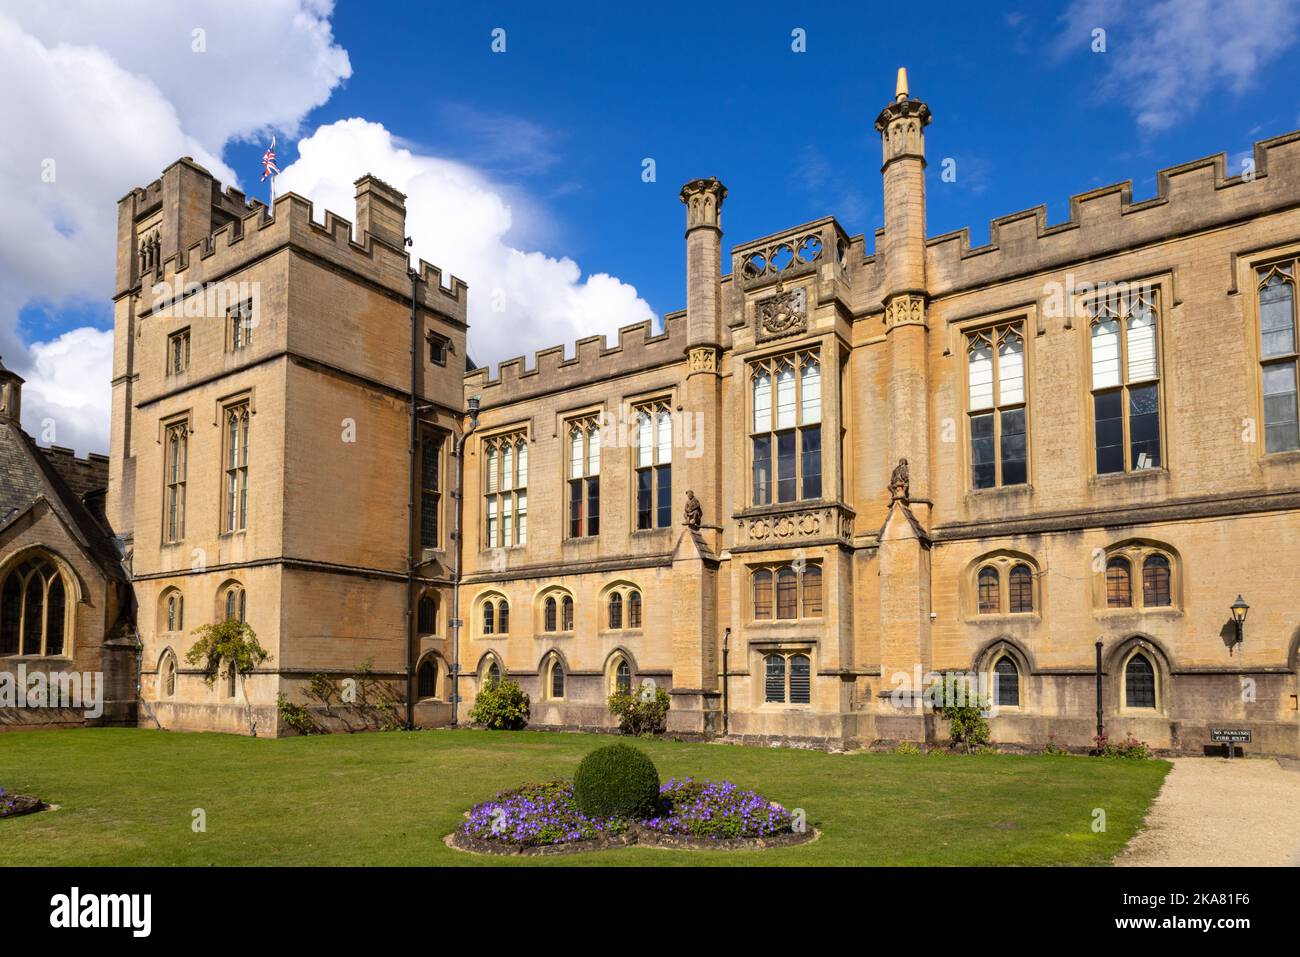 Facia of south wing, Newstead Abbey, Nottinghamshire, England, UK Stock Photo